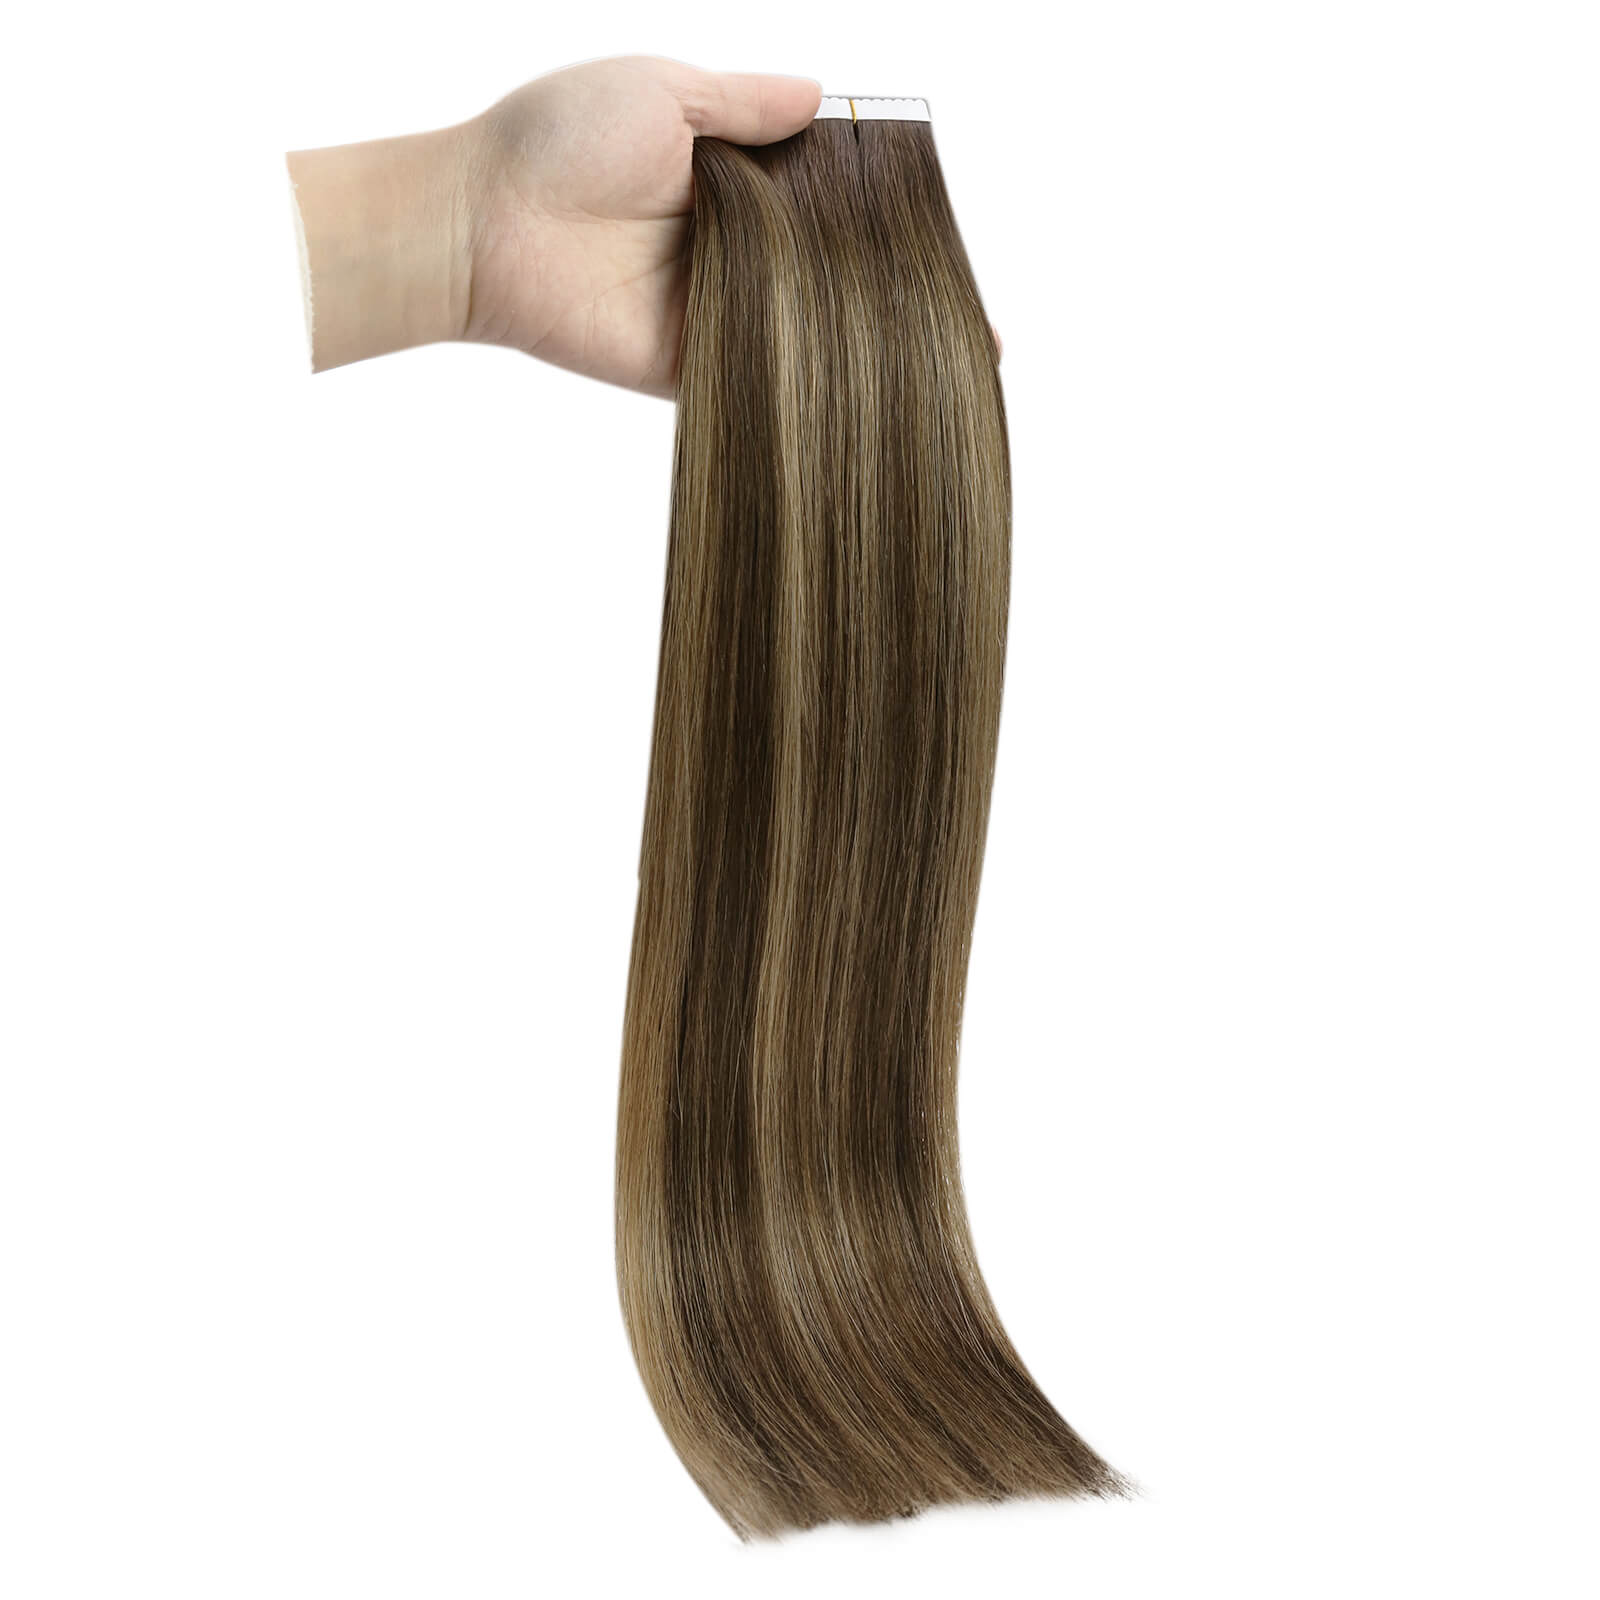 invisible injection tape in hair extensions